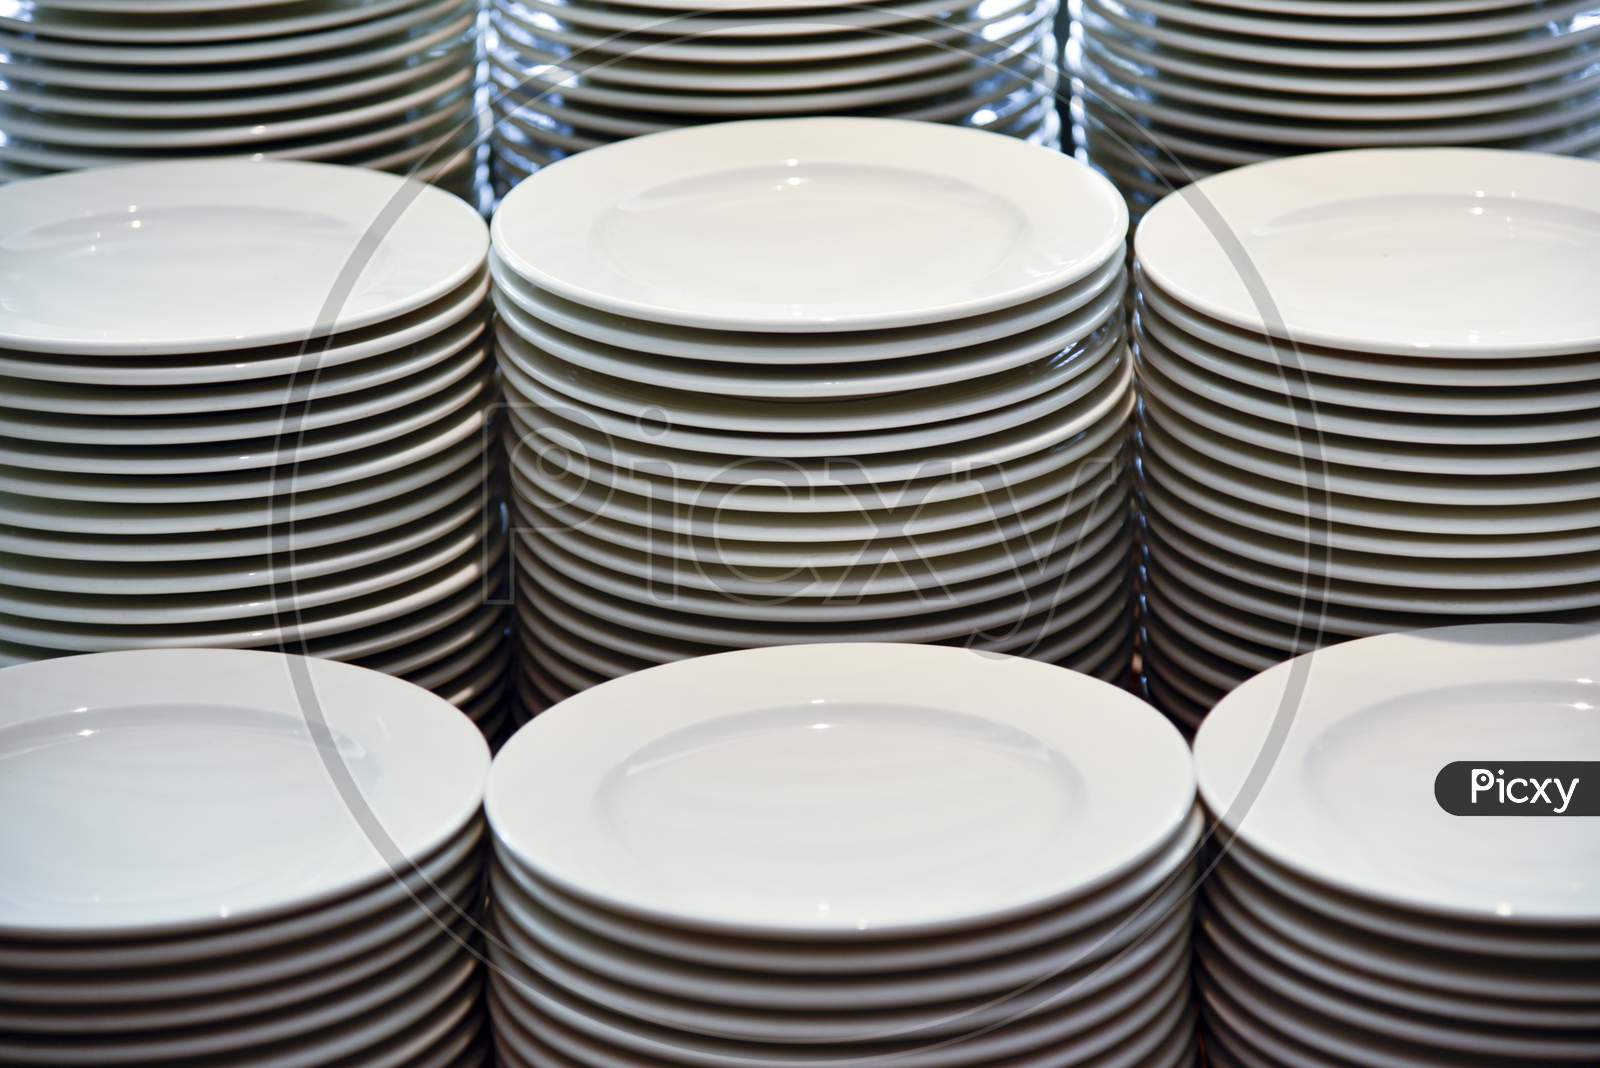 Dining Plates In an Store